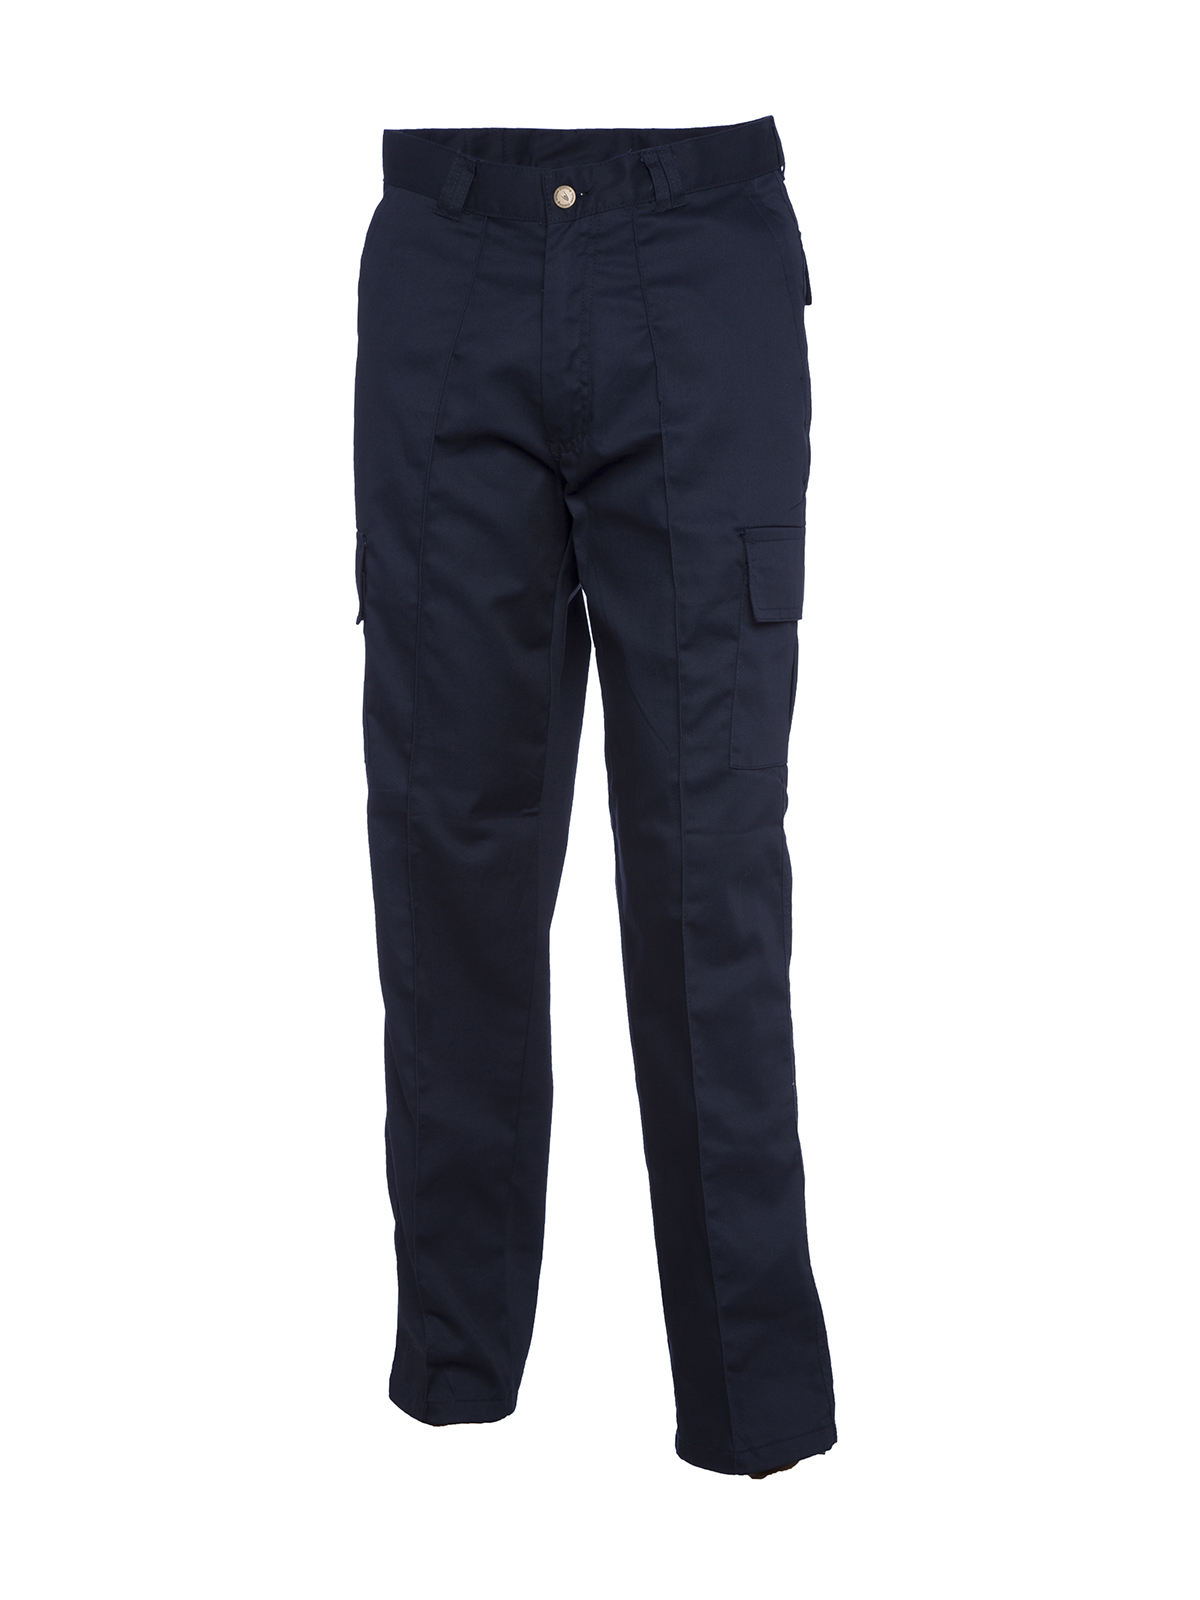 Cargo Trousers, Navy Blue - 38L